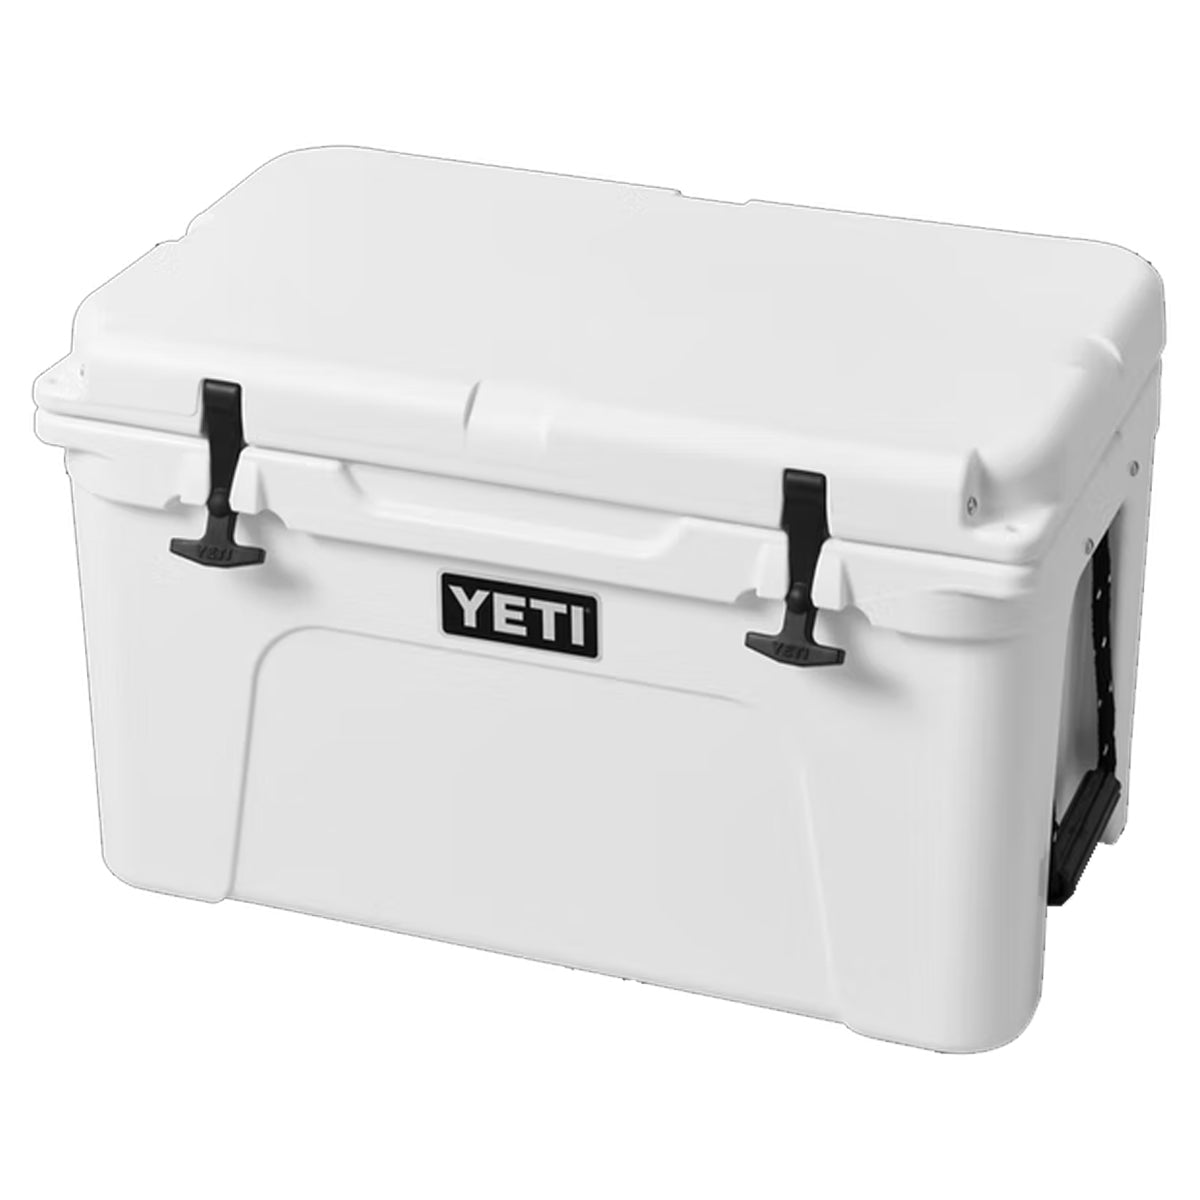 Shop for YETI Tundra 45 Cooler